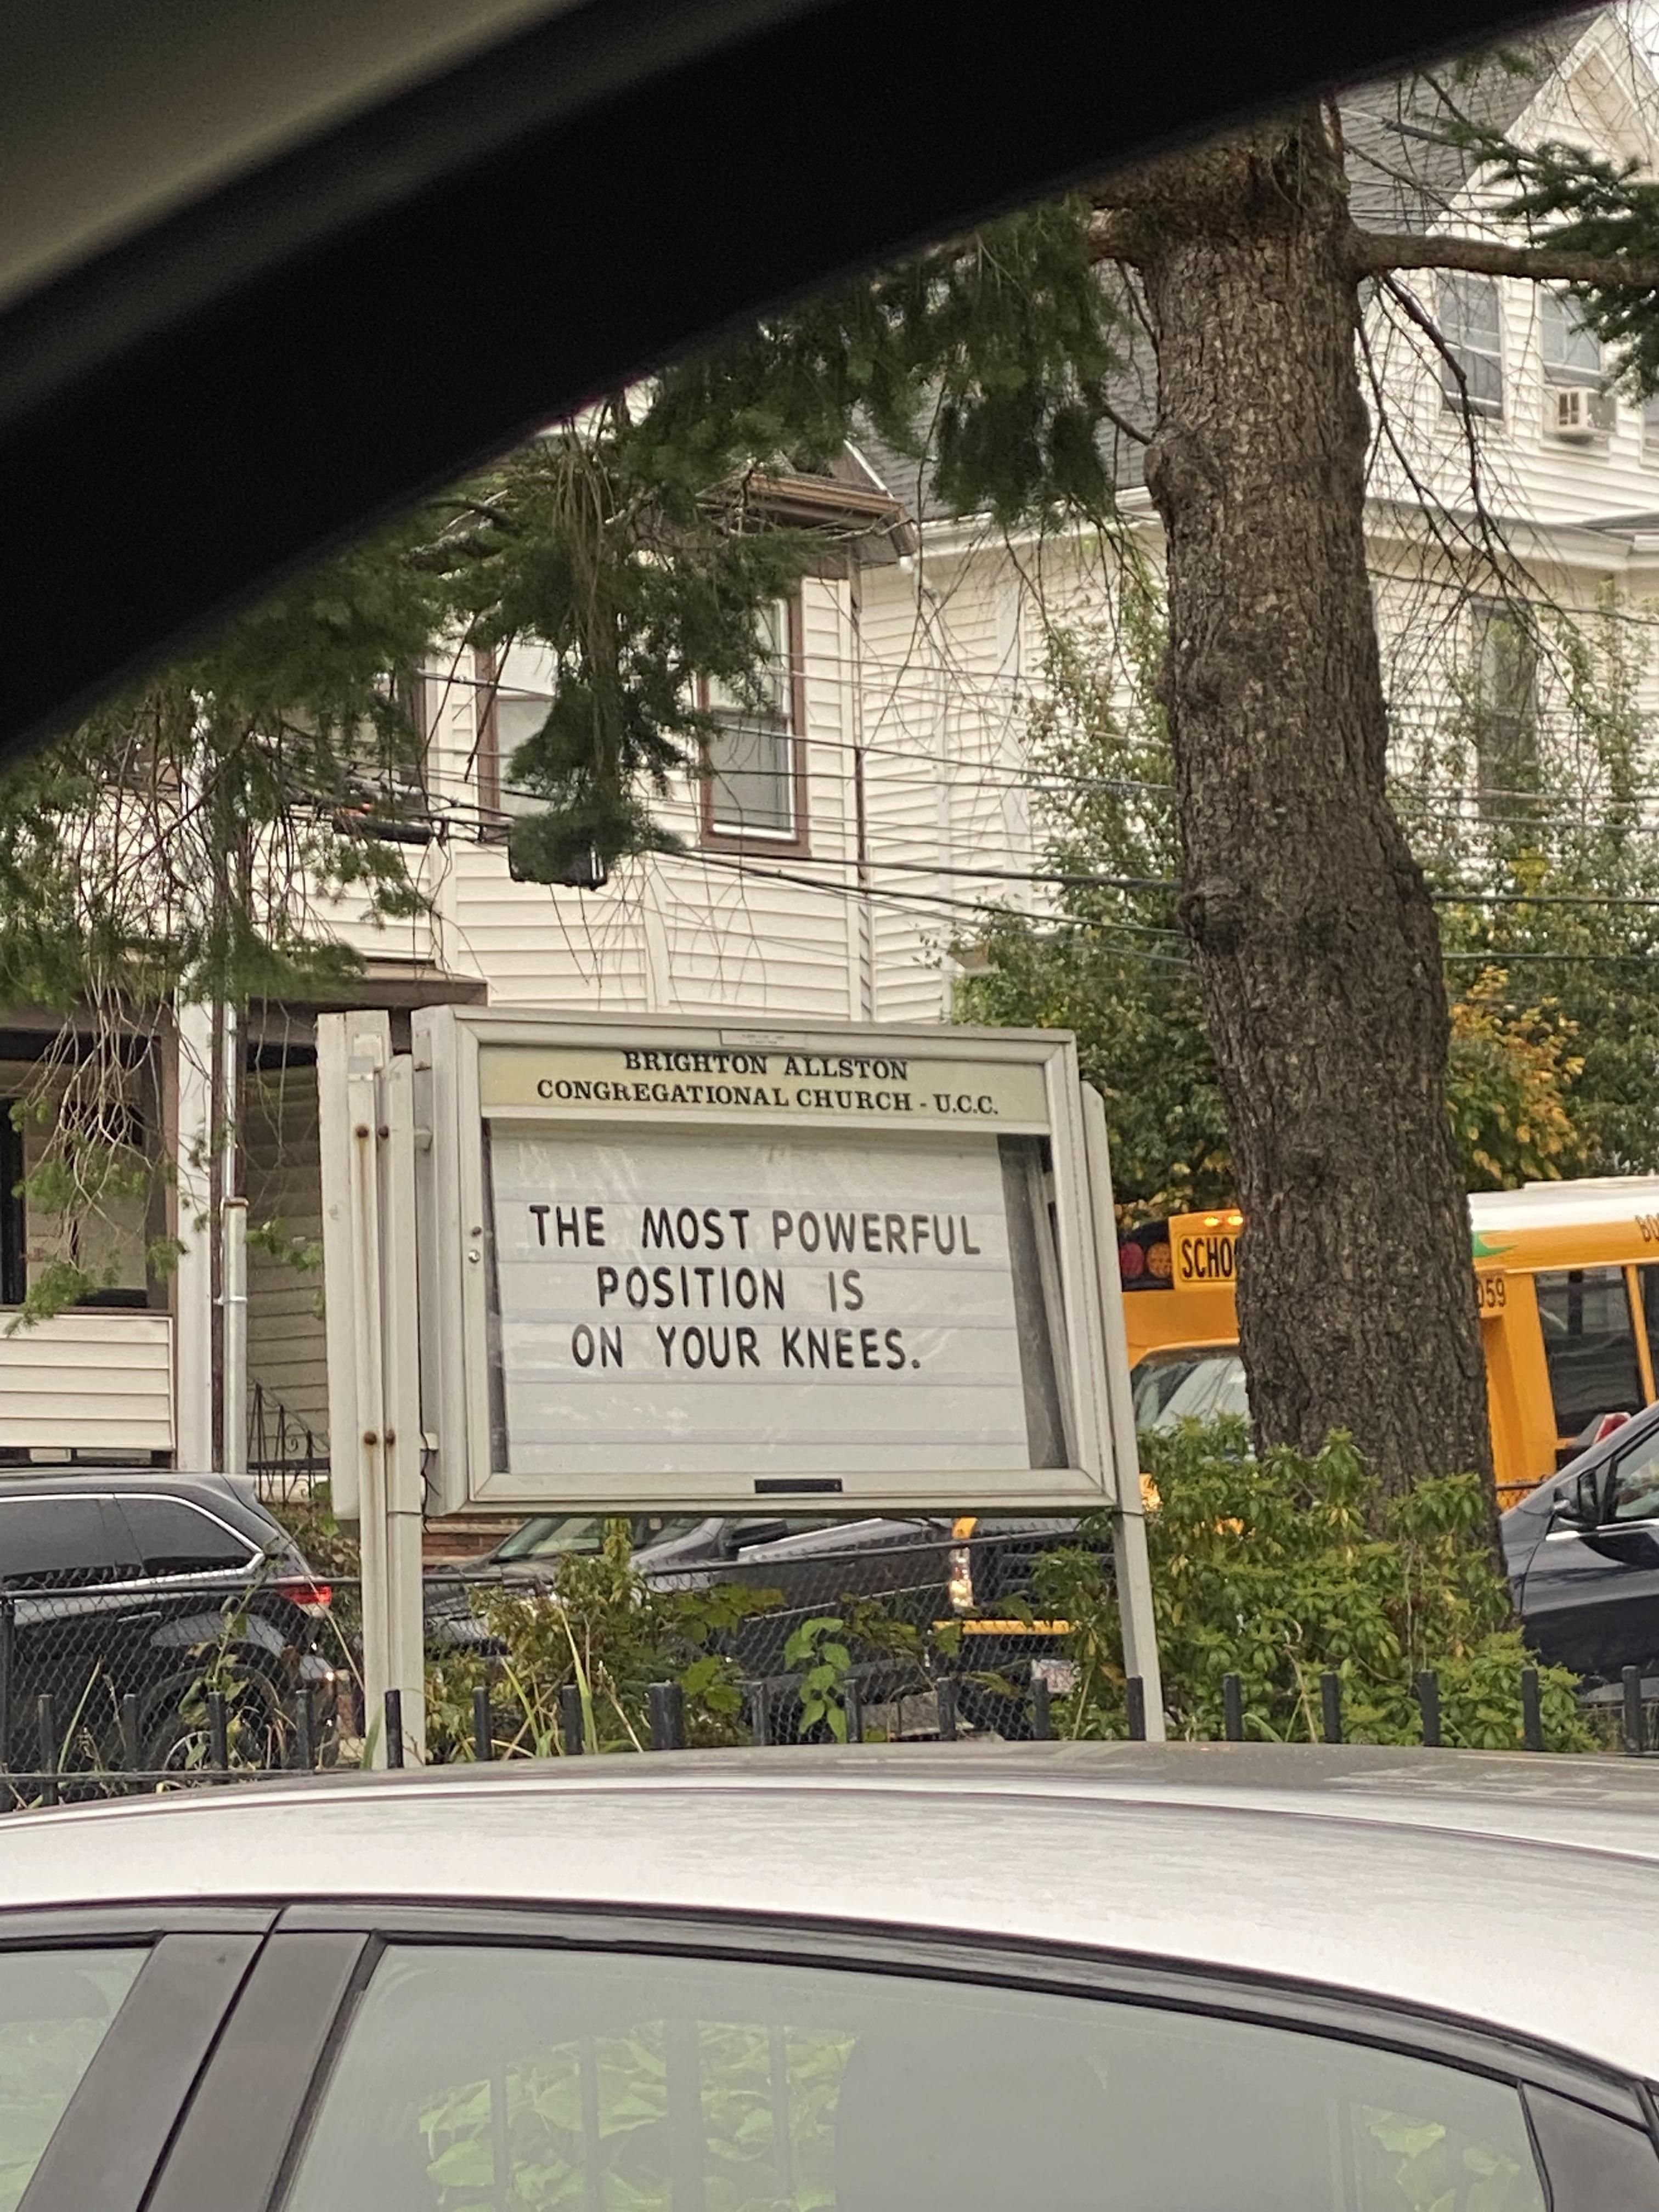 Our local church be wylin today